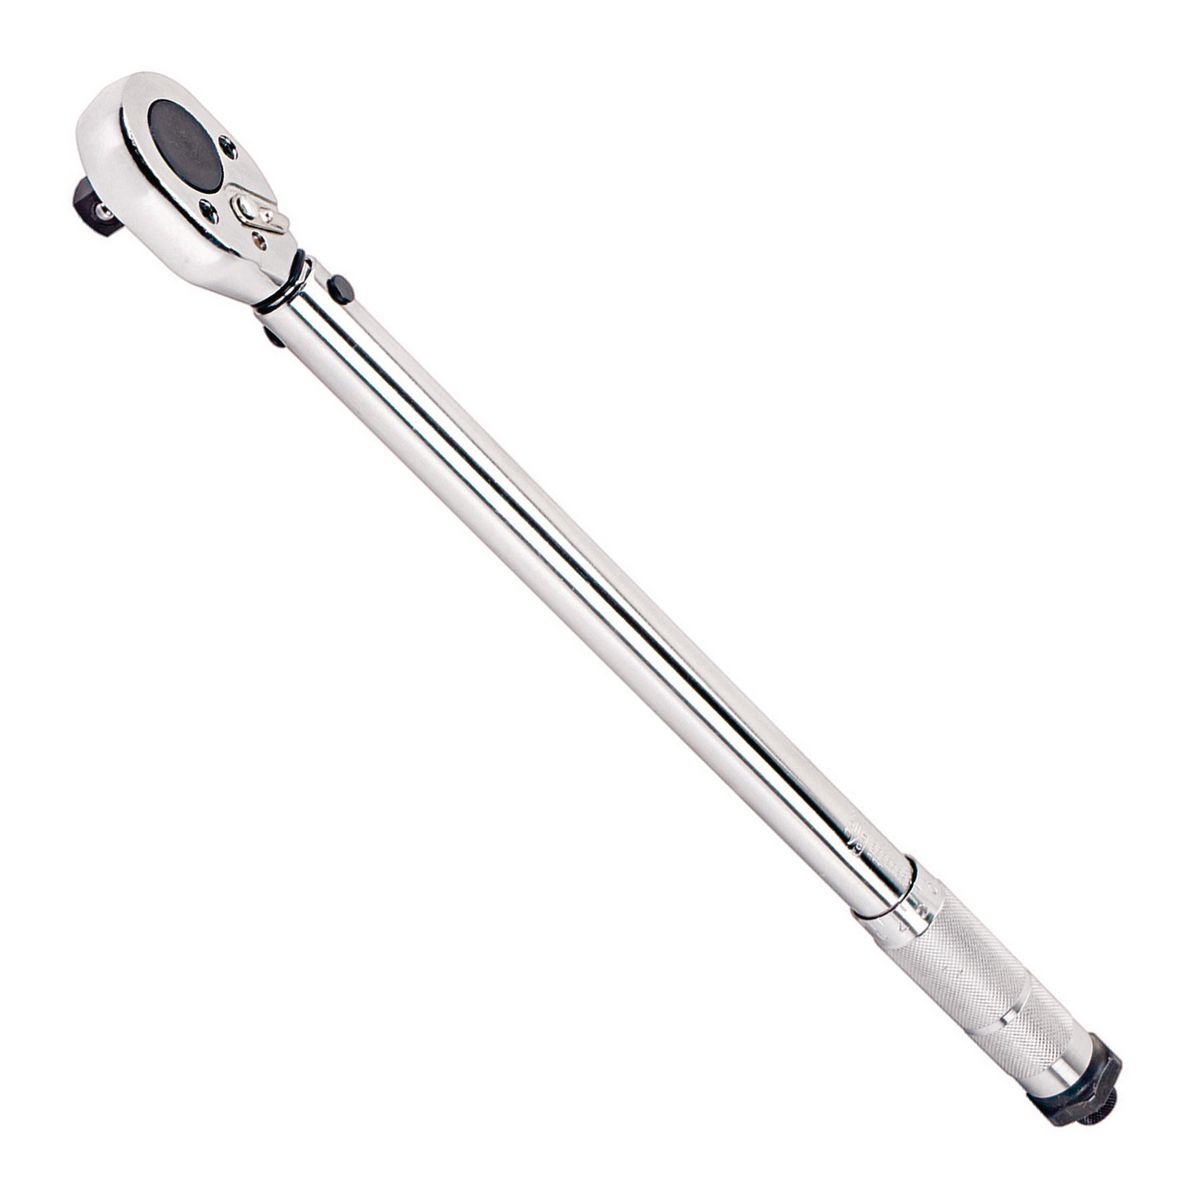 PITTSBURGH 1/2 in. Drive Click Type Torque Wrench - Item 63882 / 00239 / 62431 / 94850